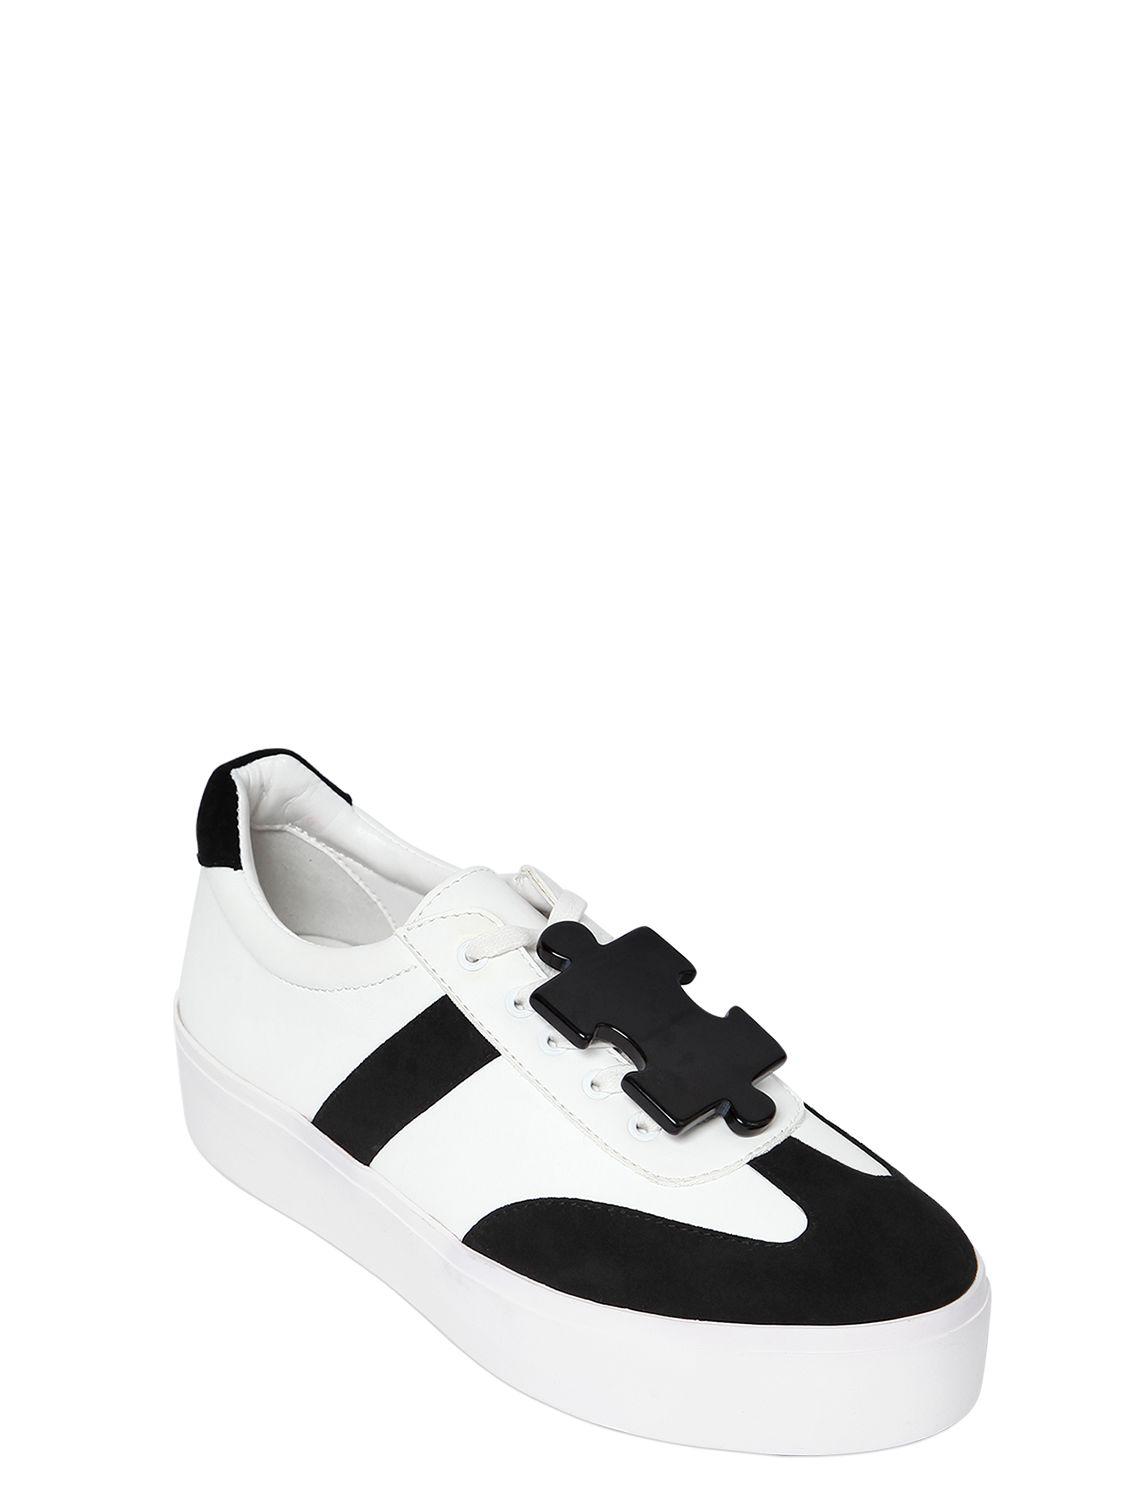 Katy Perry 40mm Payton Leather & Suede Sneakers in White/Black (Black ...